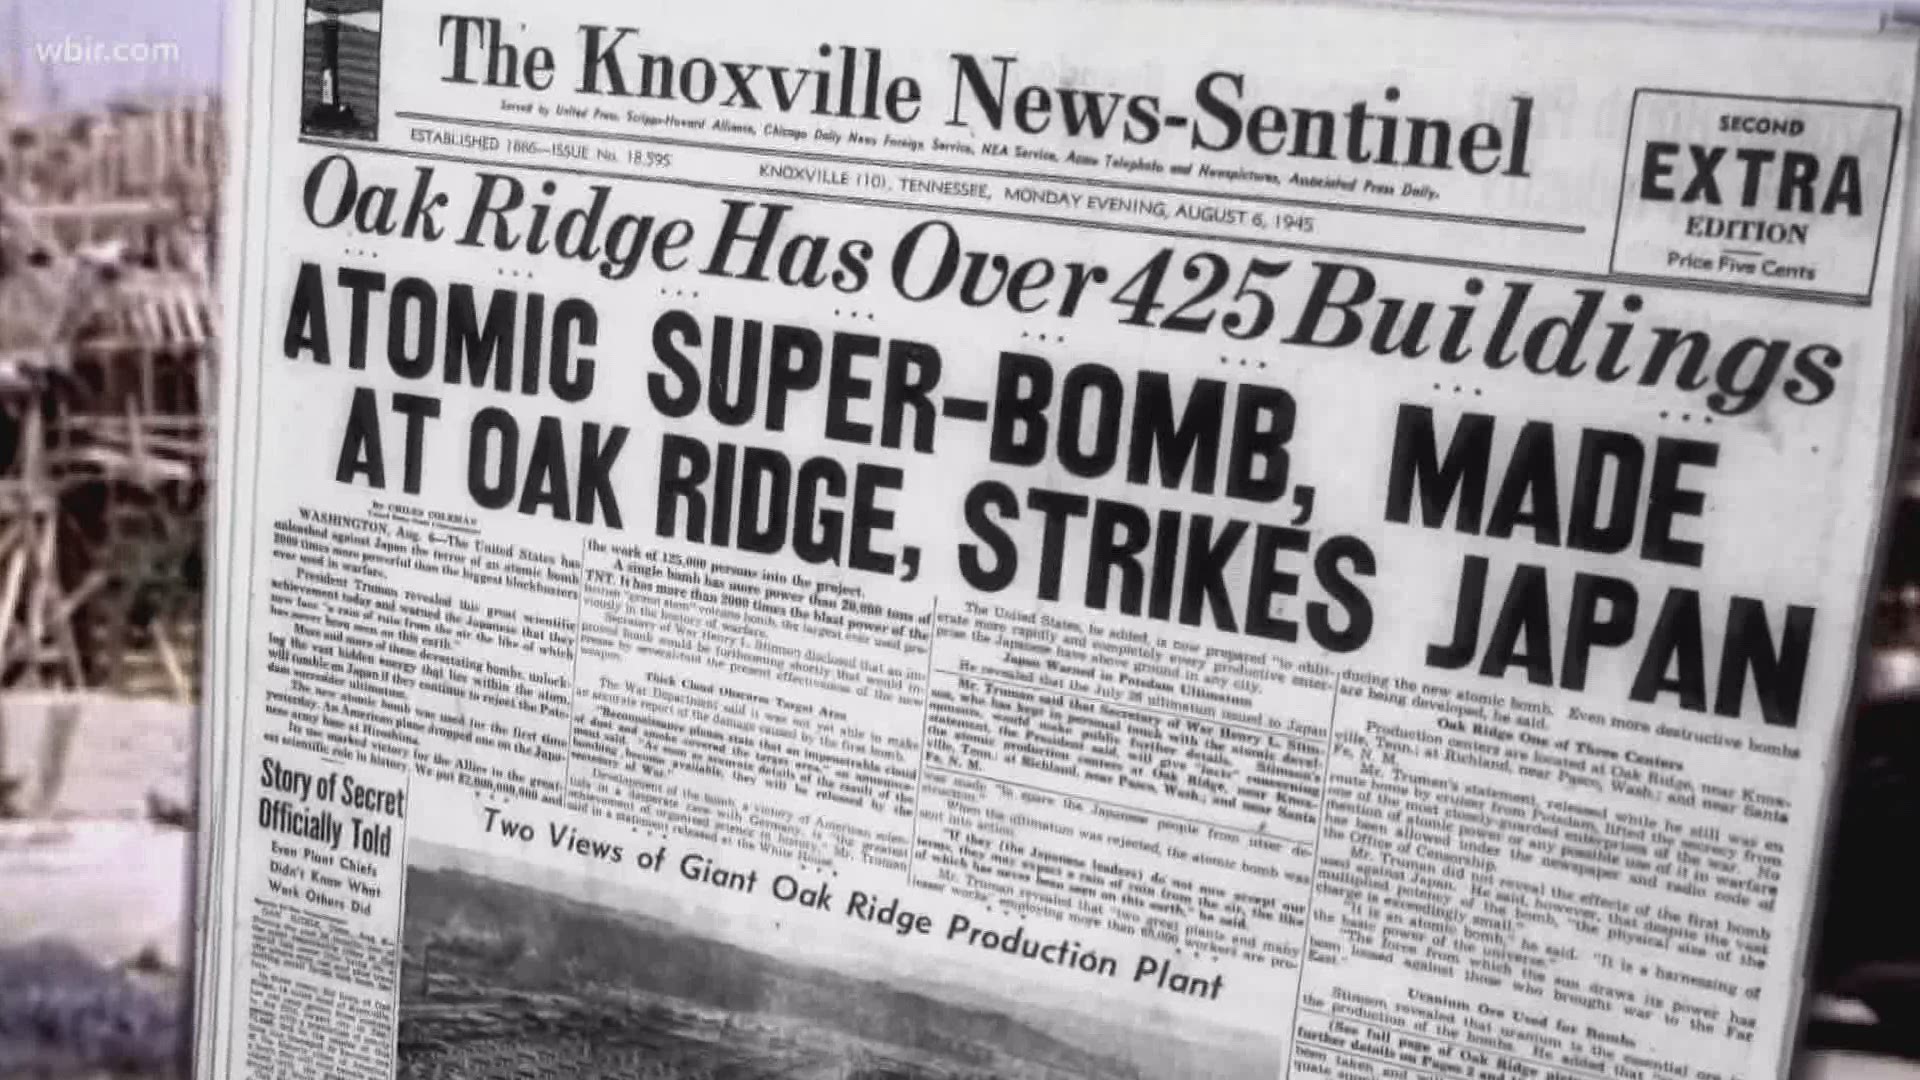 75 years ago, the U.S. dropped the atomic bomb on Japan during World War II. Its impact was felt across the country.